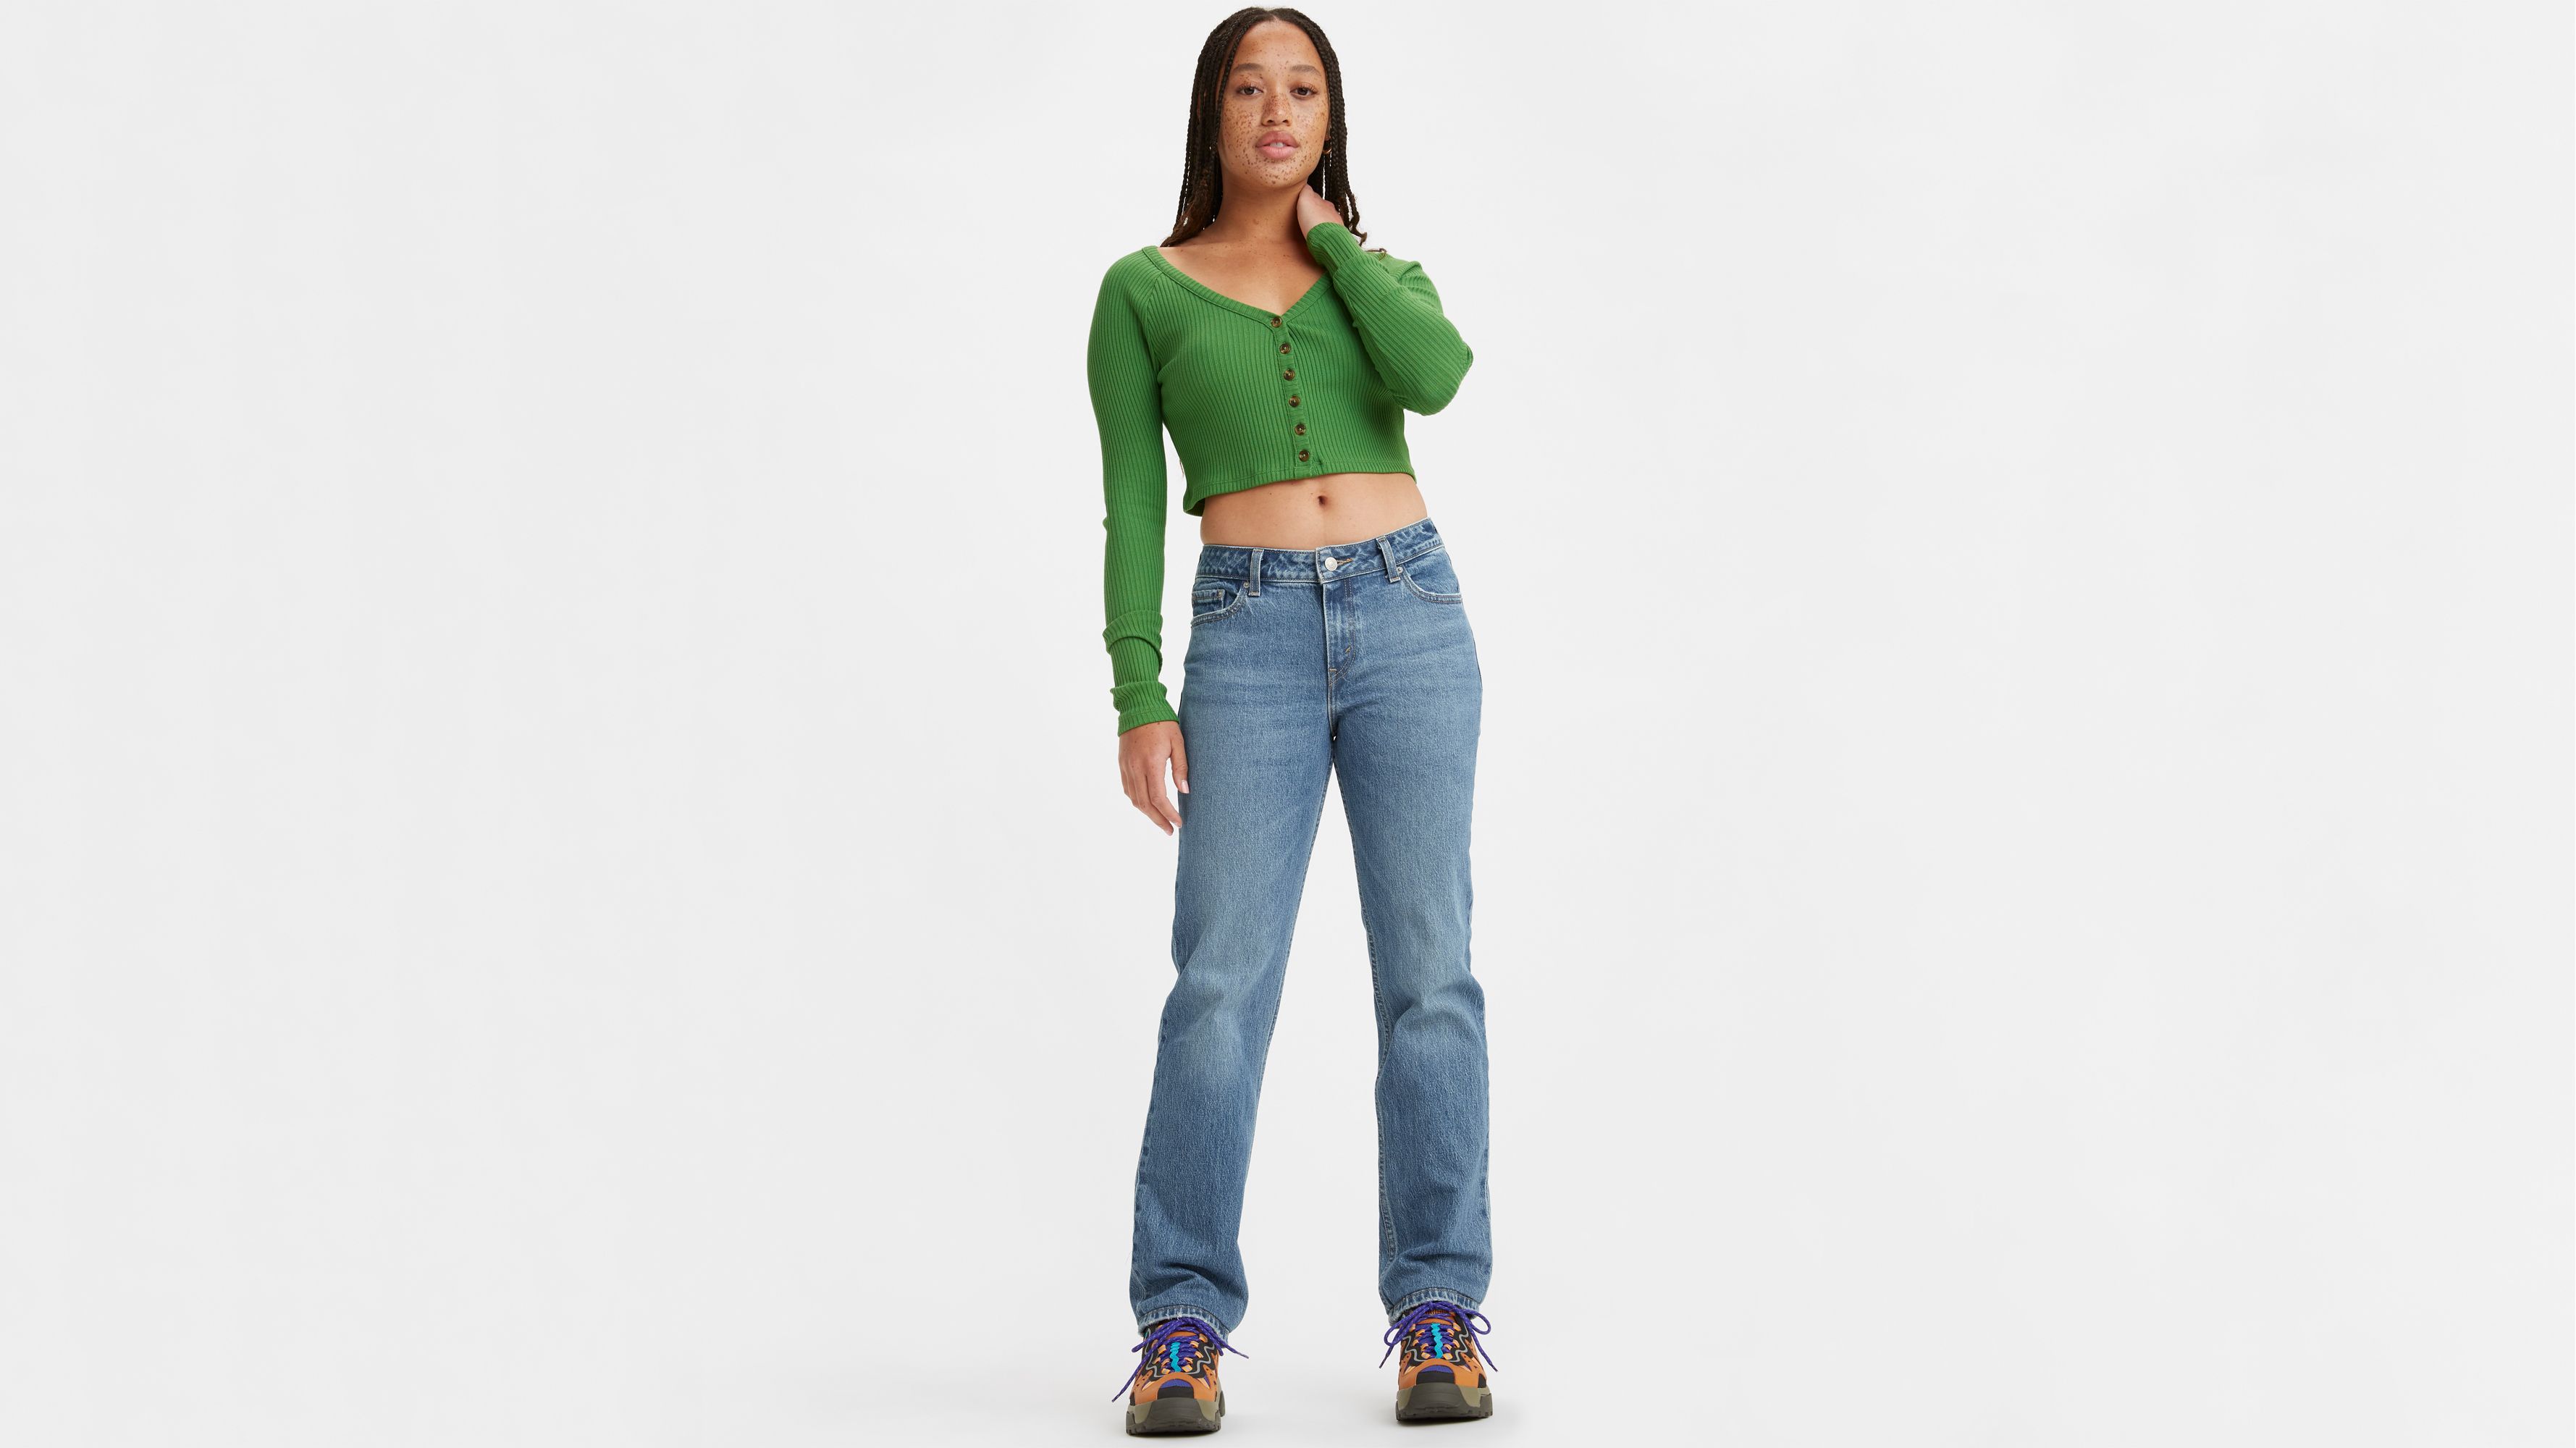 Low Pitch Straight Fit Women's Jeans - Medium Wash | Levi's® US